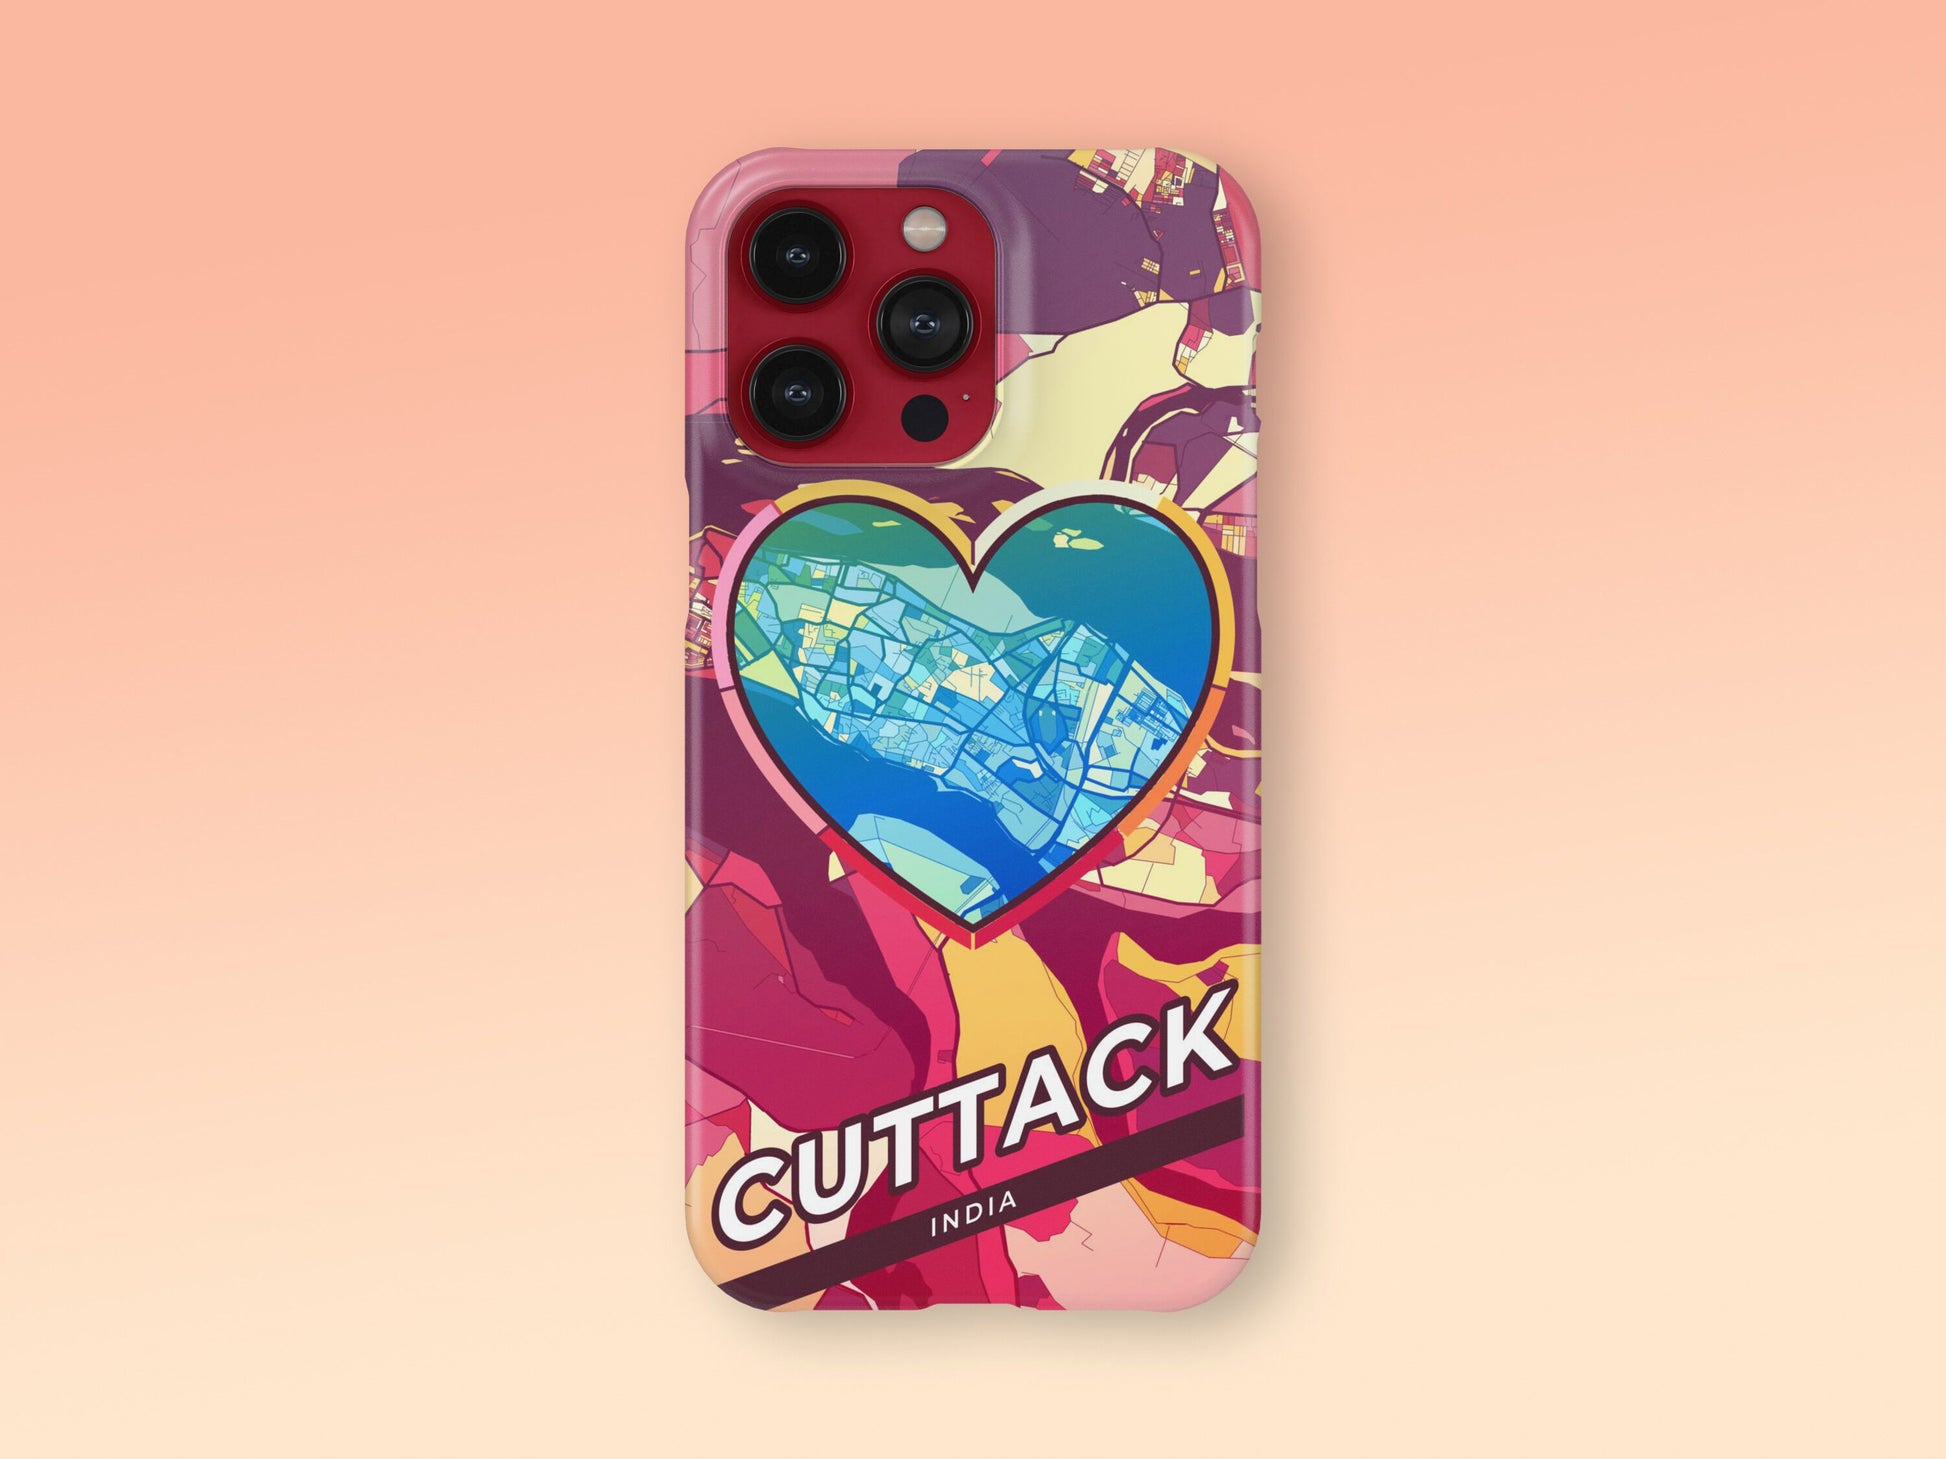 Cuttack India slim phone case with colorful icon. Birthday, wedding or housewarming gift. Couple match cases. 2